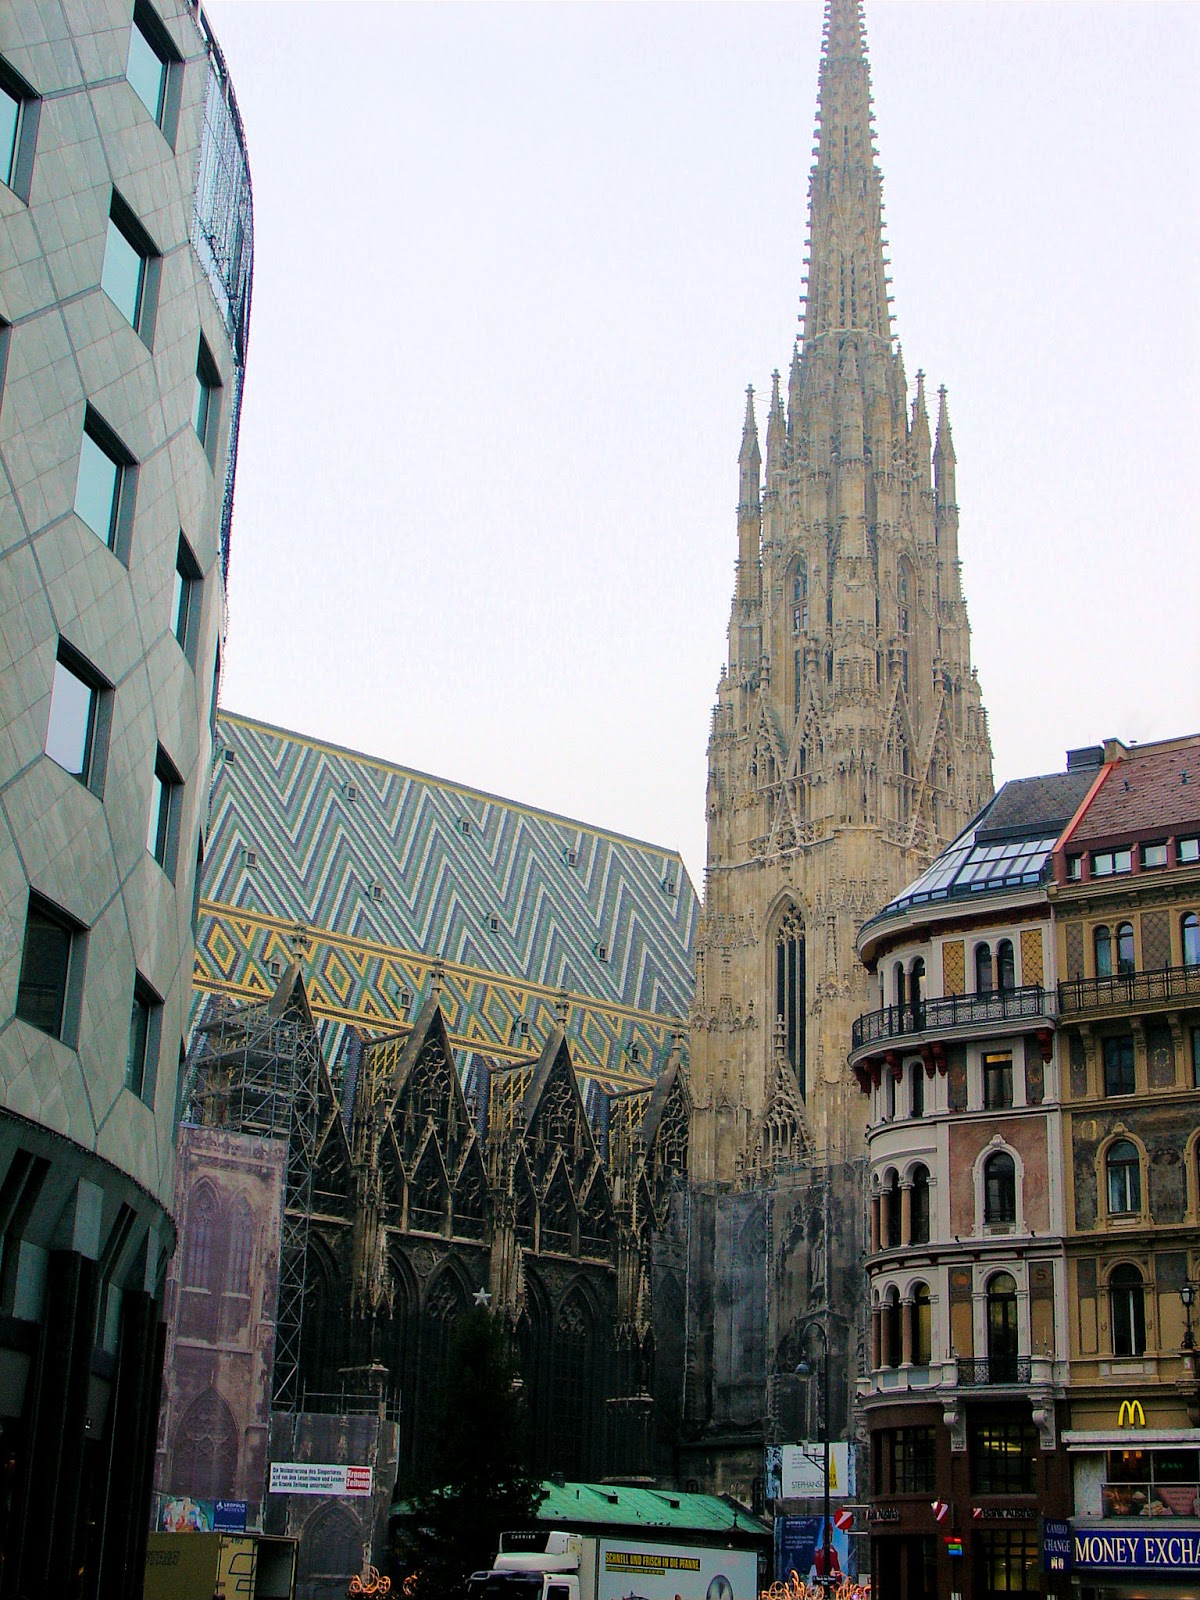 The Haas Haus at the left has become a controversy in the city of Vienna due to its modern architectural style juxtaposed with Saint Stephan's in the background. Look deeper, and more contrast in the geometric patterns on the roof.